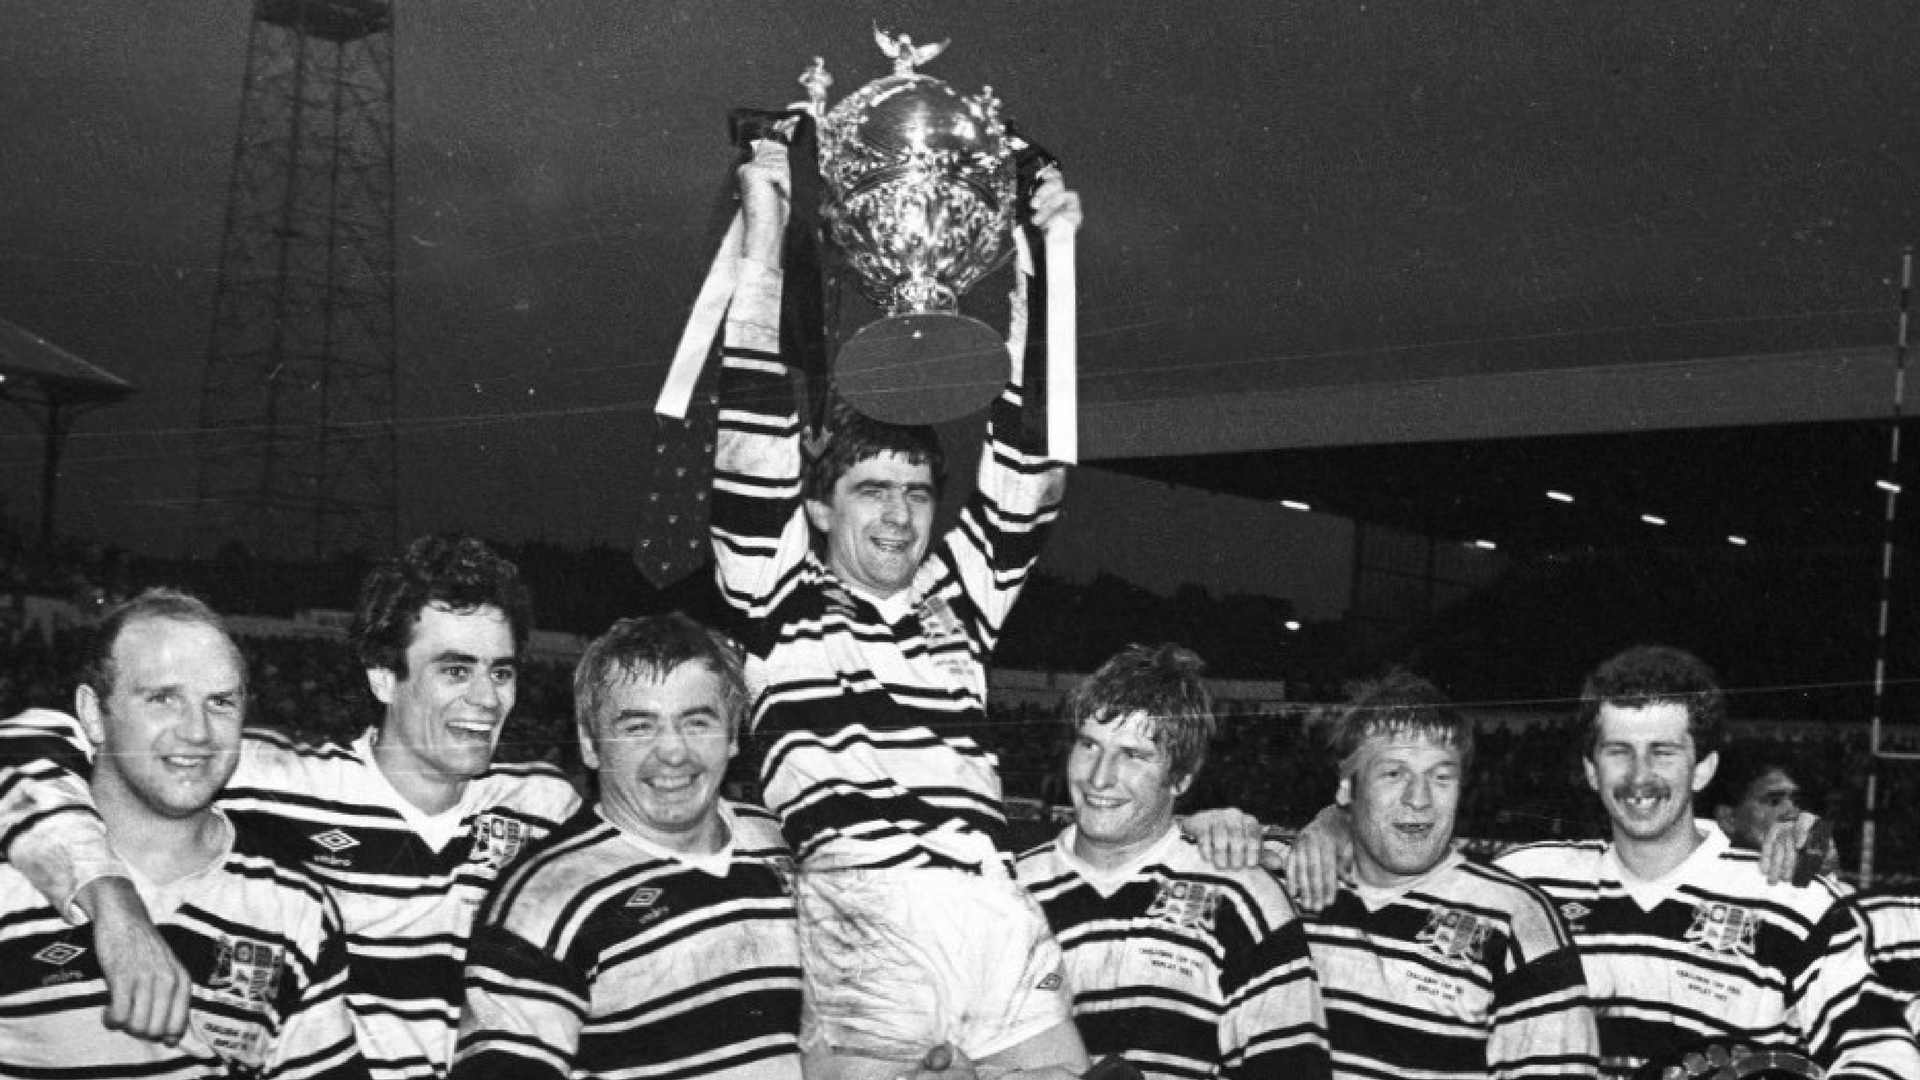 Challenge Cup number two would come in 1982, as the Black & Whites defeated Widnes in a replay at Headingley Stadium.